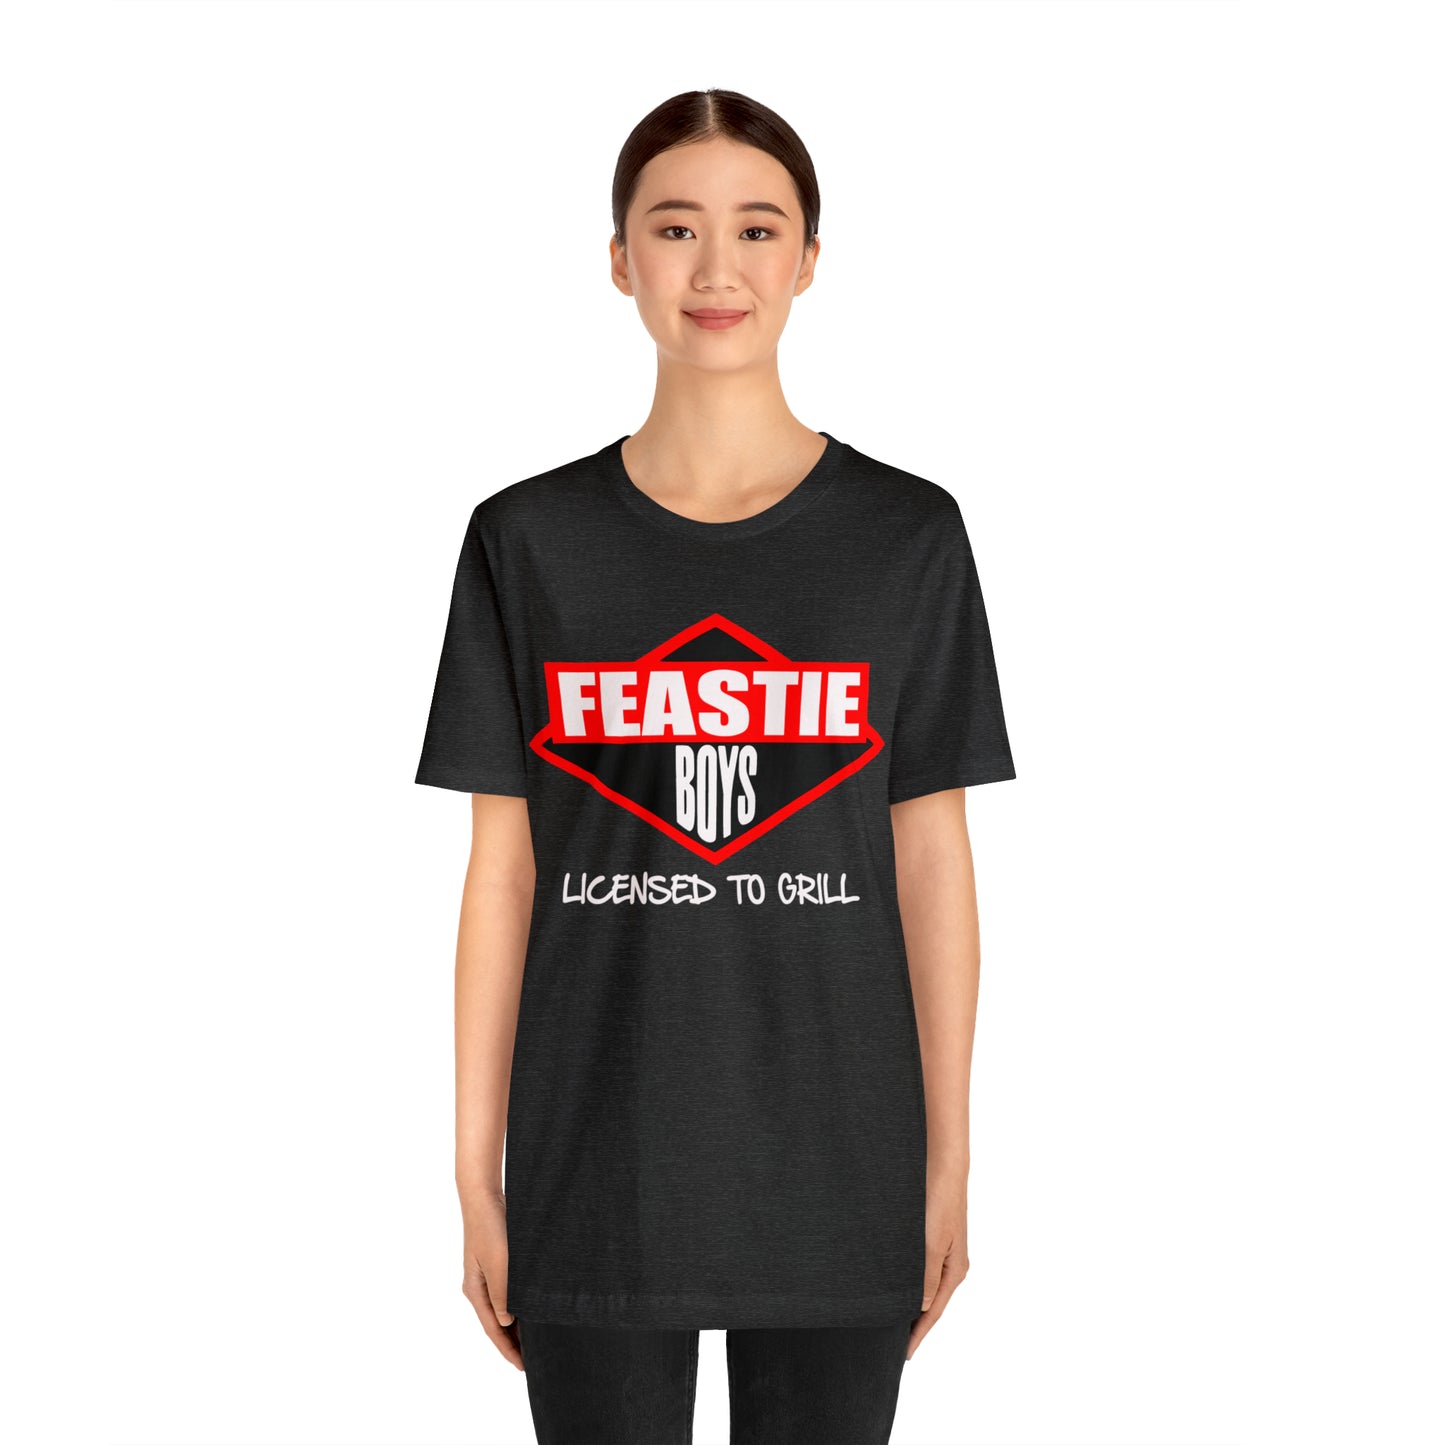 Feastie Boys - Licensed to Grill Tee